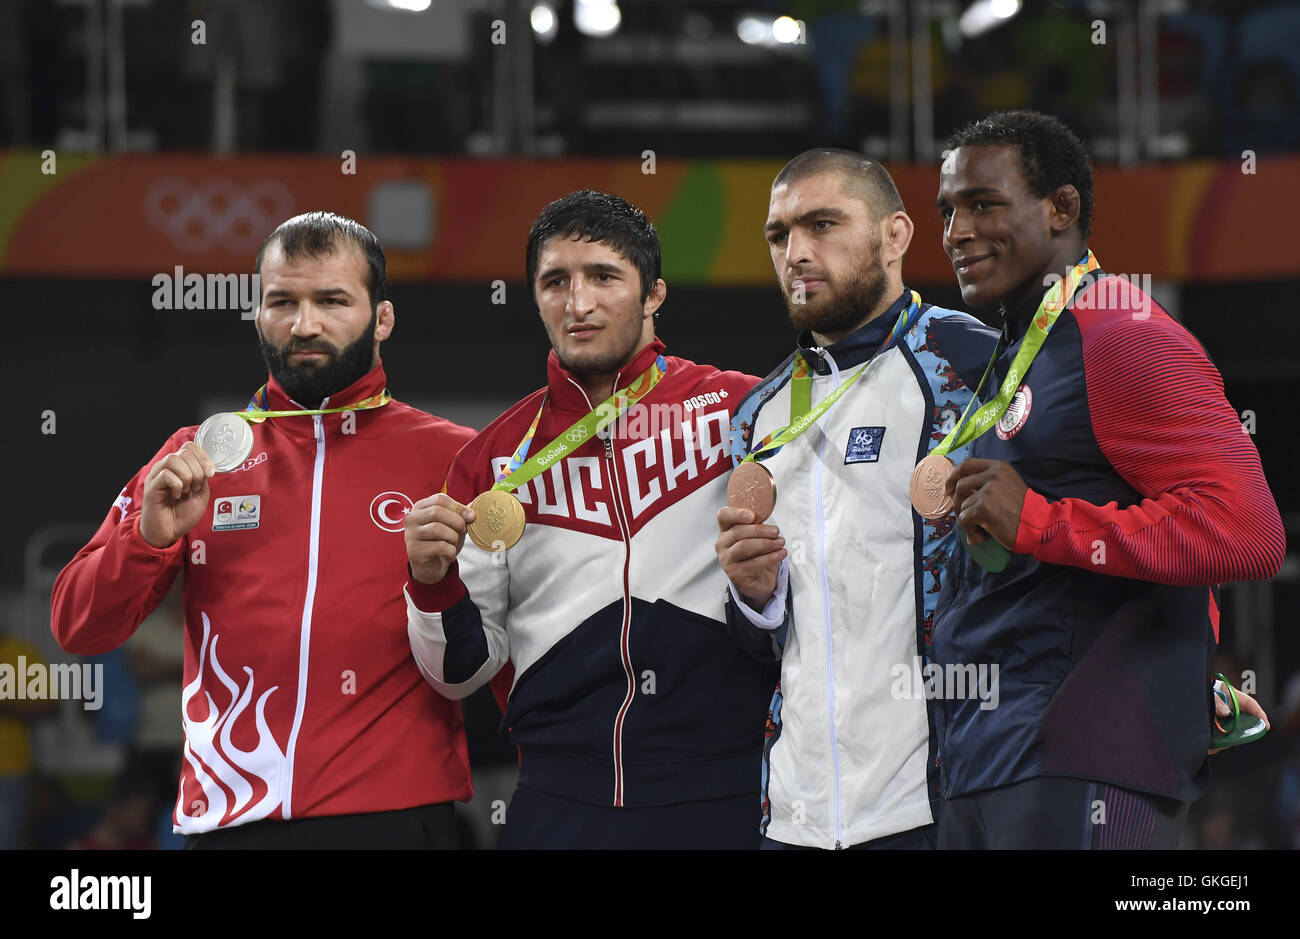 Rio De Janeiro, Brazil. 20th Aug, 2016. Gold medalist Russia's Abdulrashid Sadulaev (2nd, L), silver medalist Turkey's Selim Yasar (1st, L), bronze medalists Azerbaijan's Sharif Sharifov (2nd, R) and J'den Michael Tbory Cox of the United States of America attend the awarding ceremony for the men's freestyle 86kg final of Wrestling at the 2016 Rio Olympic Games in Rio de Janeiro, Brazil, on Aug. 20, 2016. Credit:  Wu Wei/Xinhua/Alamy Live News Stock Photo